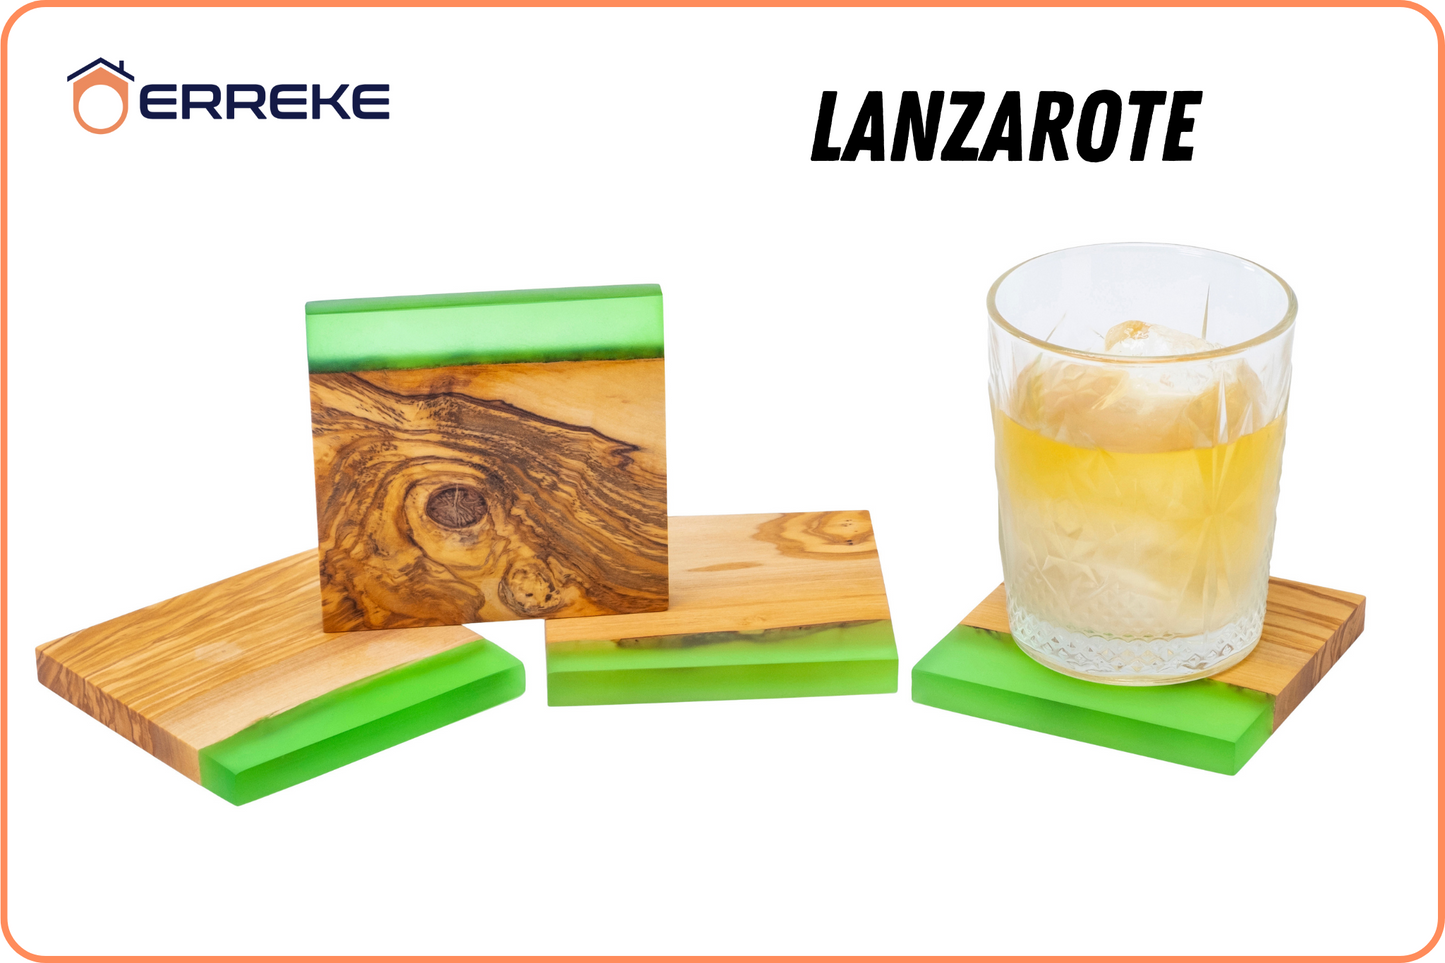 Set of 4 Original Coasters in Natural Olive Wood and Epoxy Resin LANZAROTE, Cups, Glasses, 10x10x1.2 cm (Green)